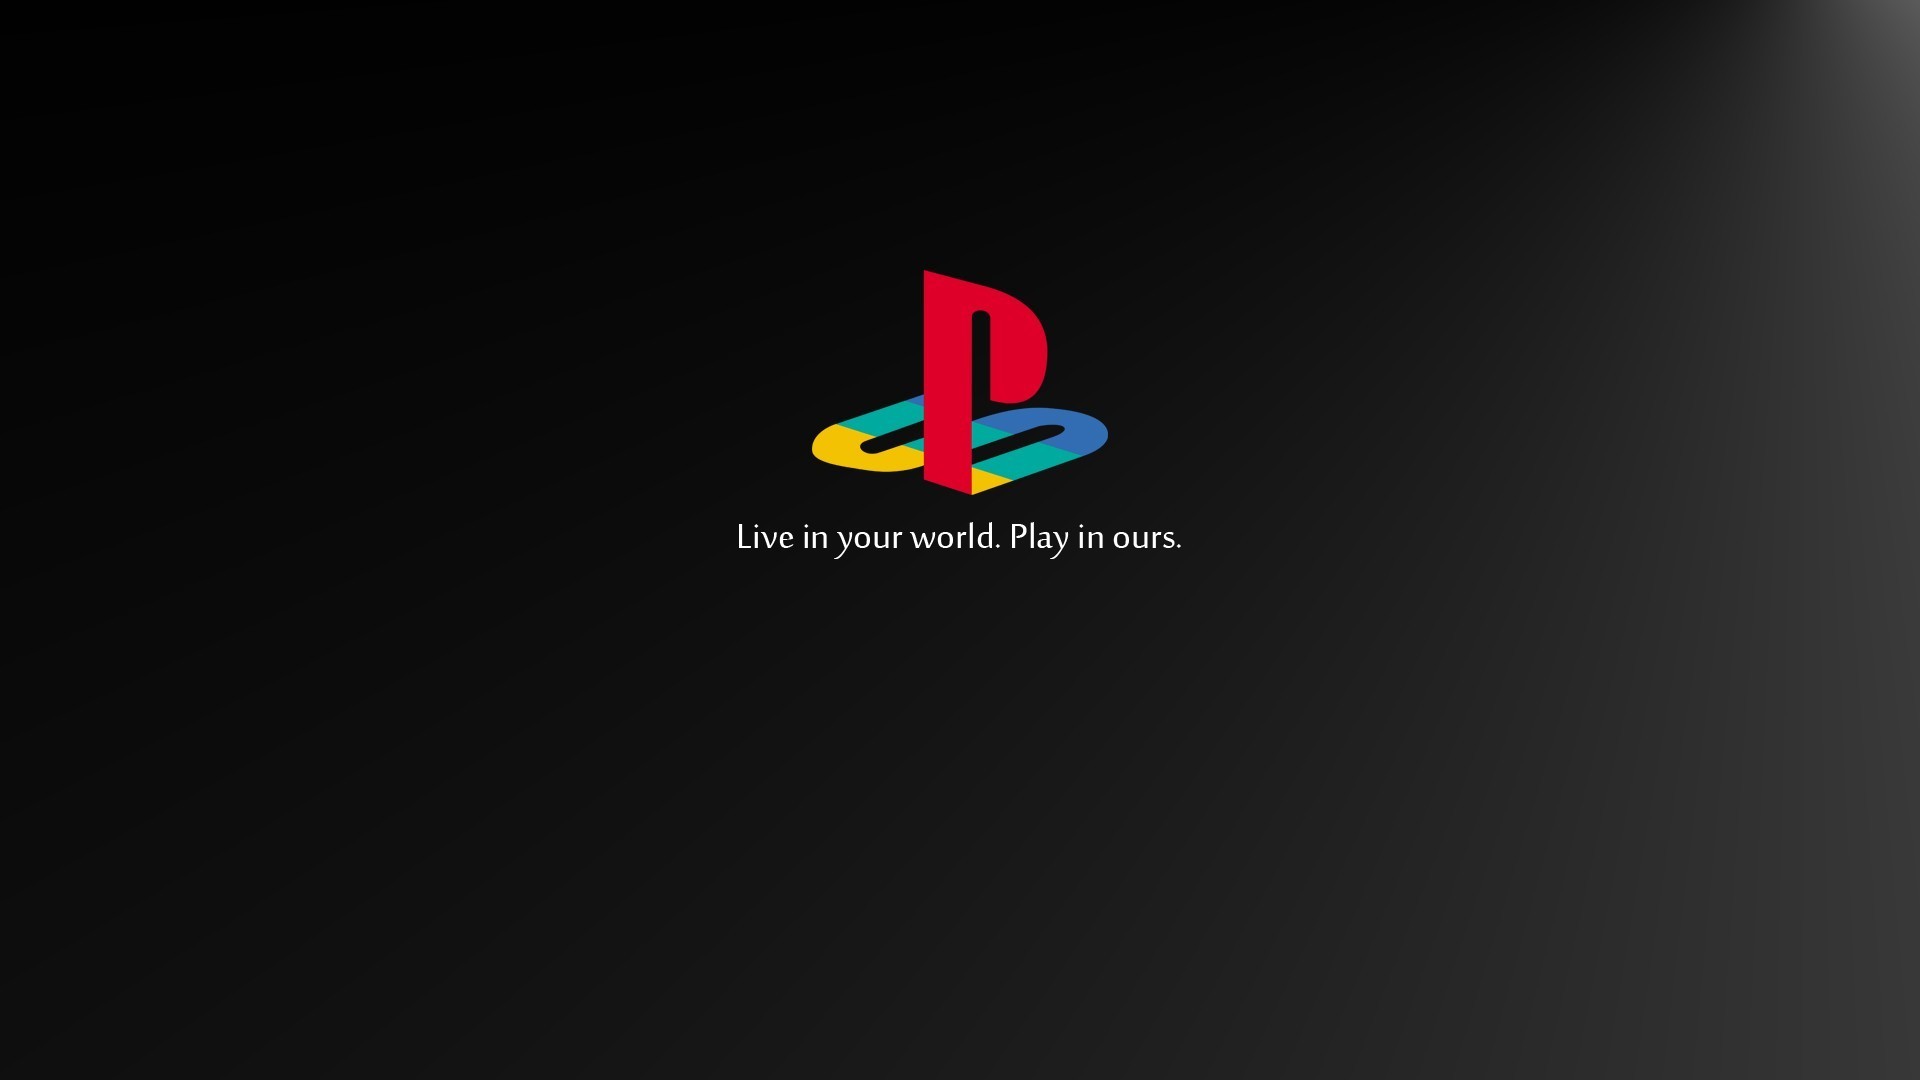 1920x1080 PlayStation, Retro Games, Video Games, Logo, Sony, Black, Consoles, Console  Wallpapers HD / Desktop and Mobile Backgrounds